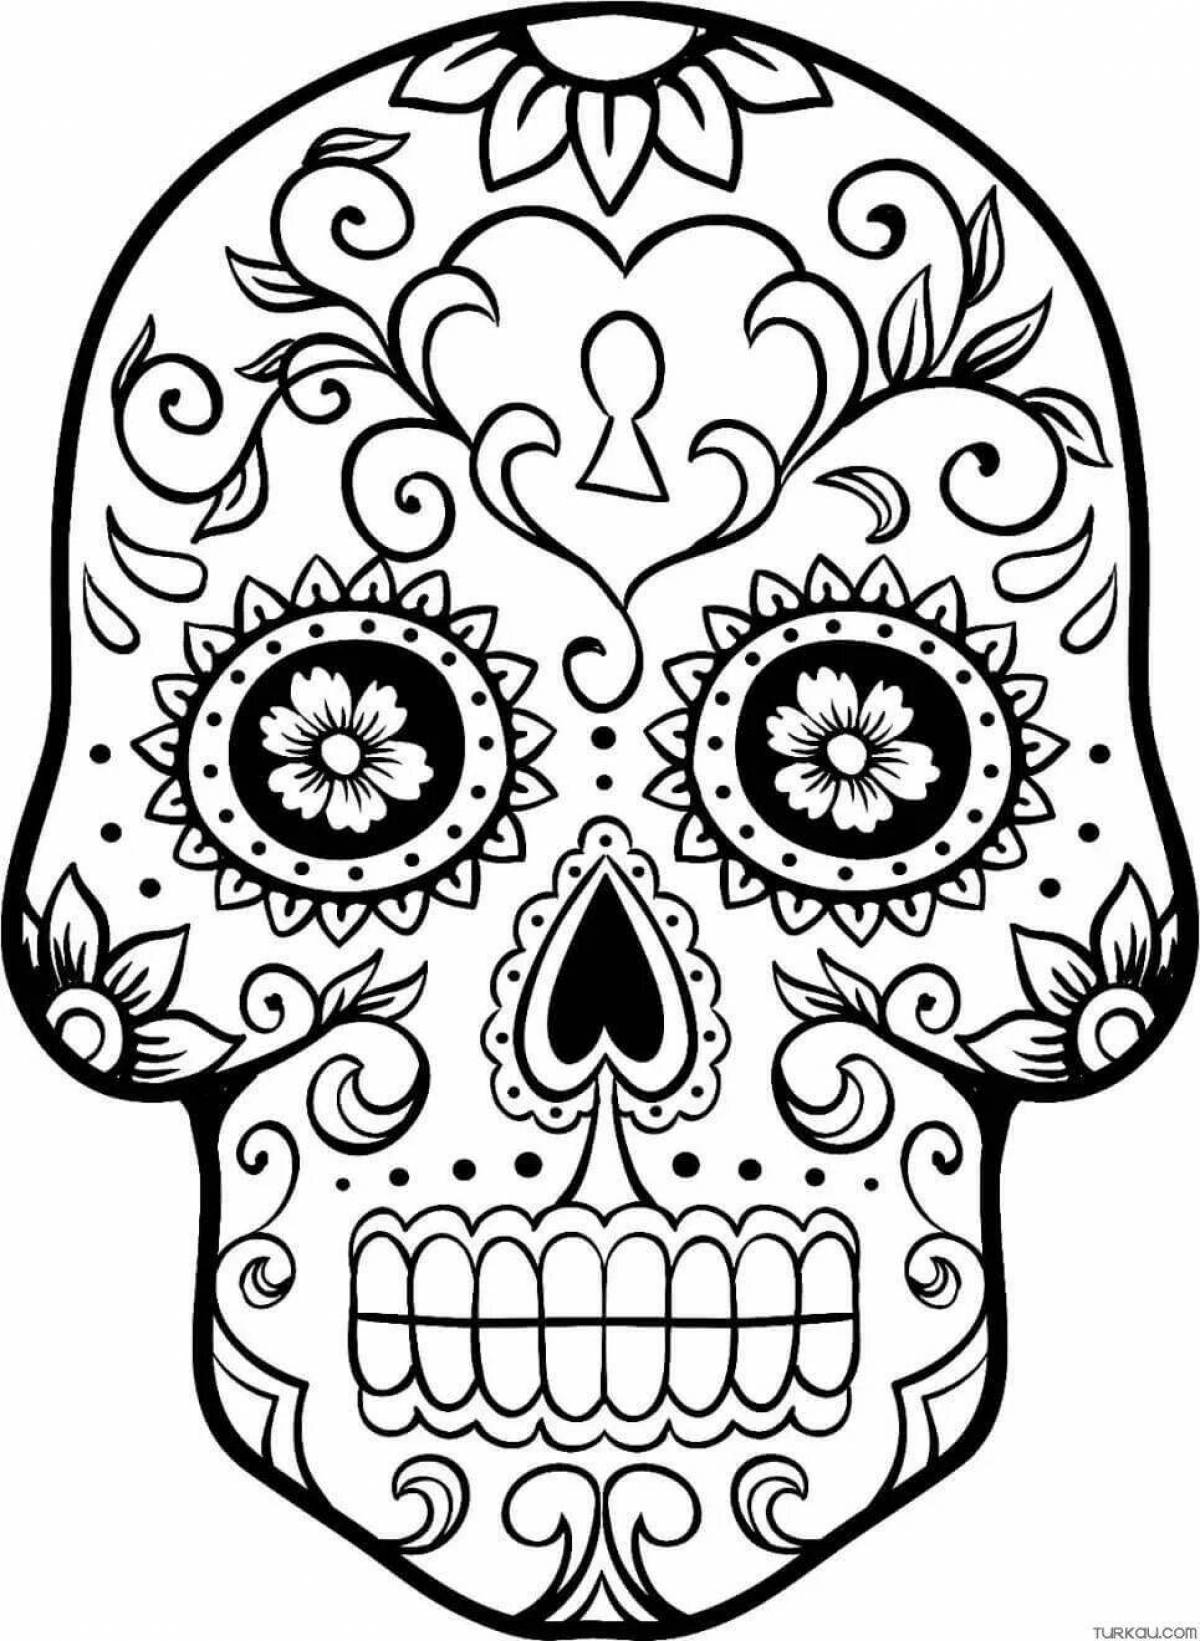 Creative skull coloring for kids